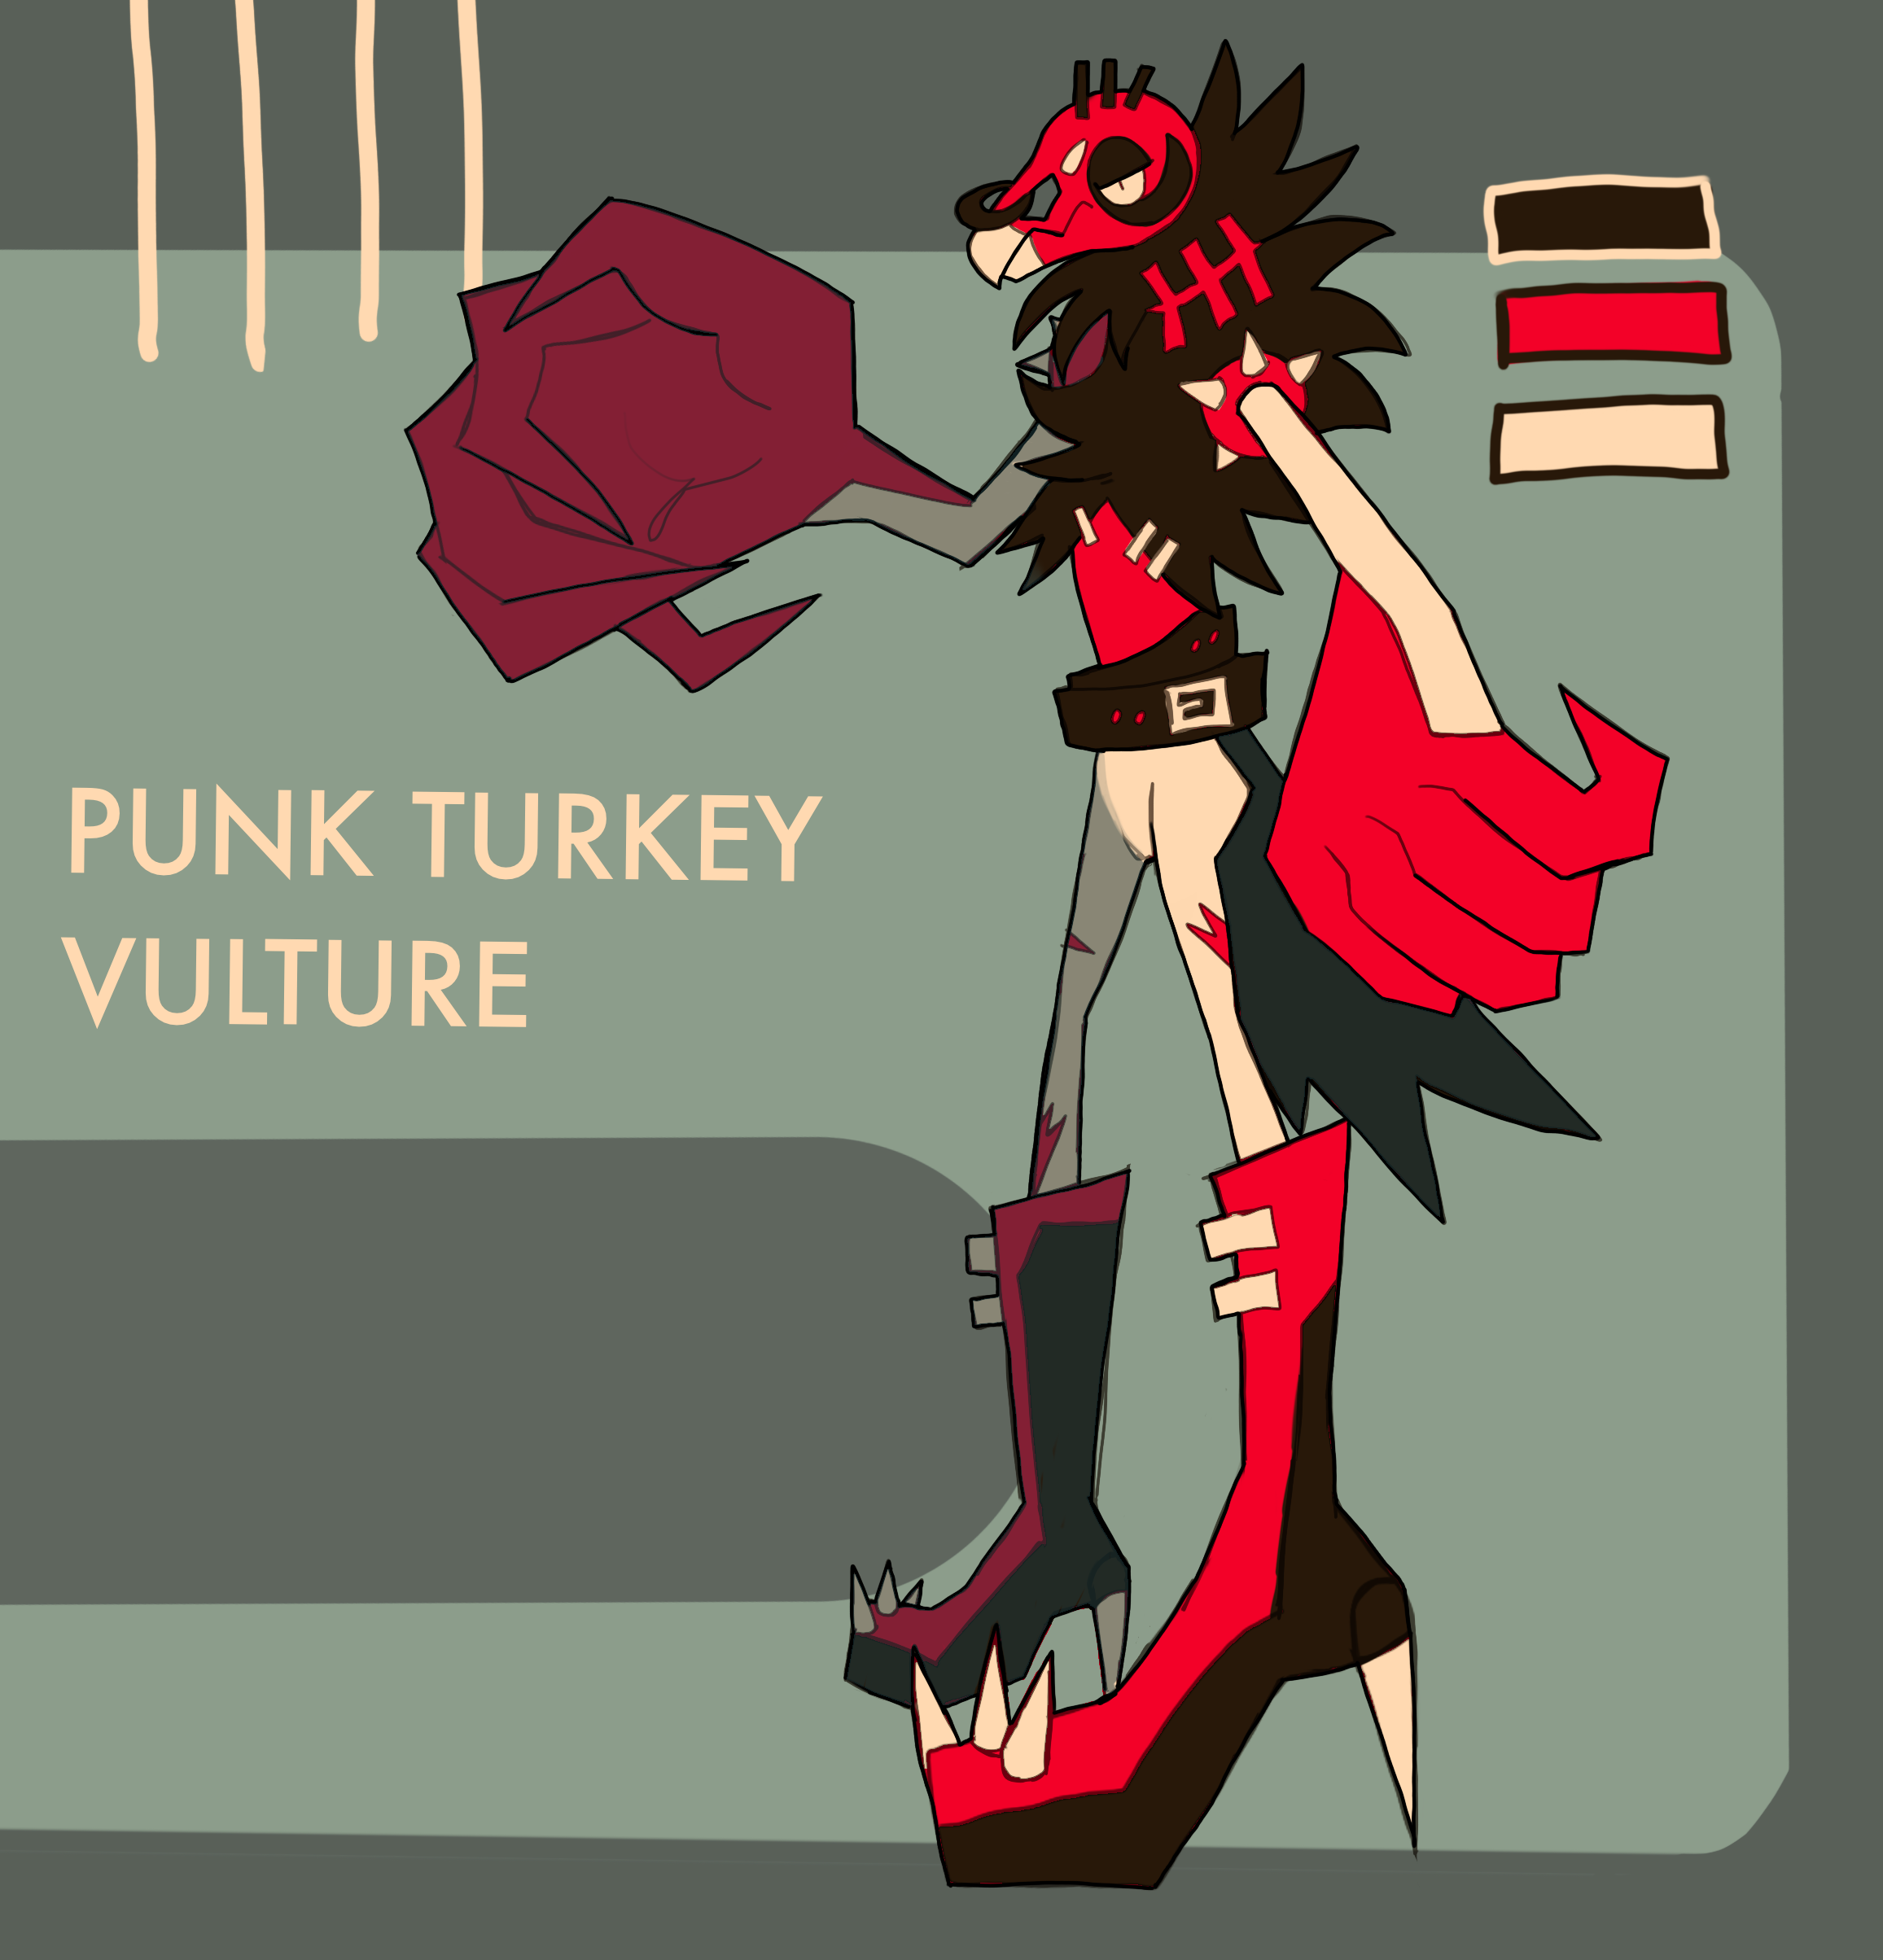 This character design is a punk turkey vulture that I made to sell, done in 2021.